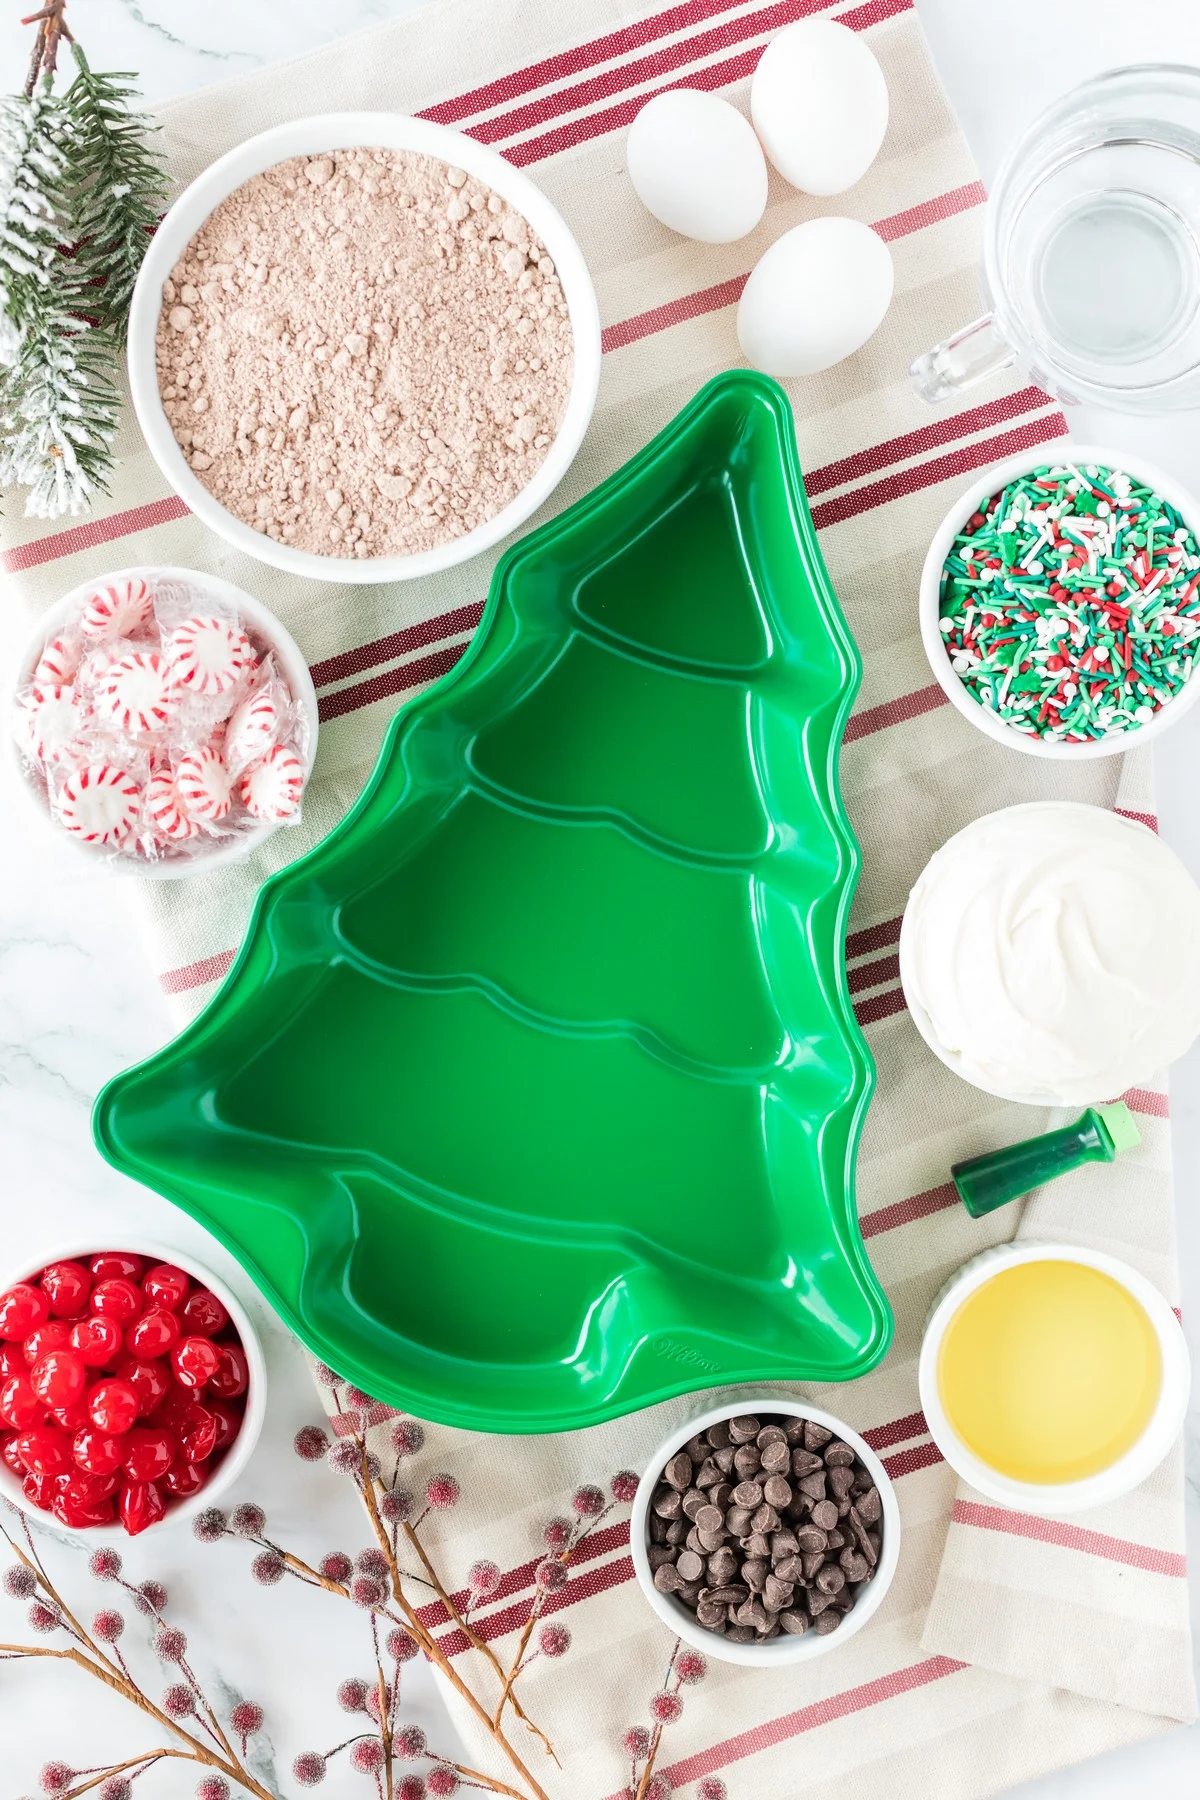 https://www.southerncravings.com/wp-content/uploads/2022/10/Christmas-Tree-Cake-1.jpg.webp